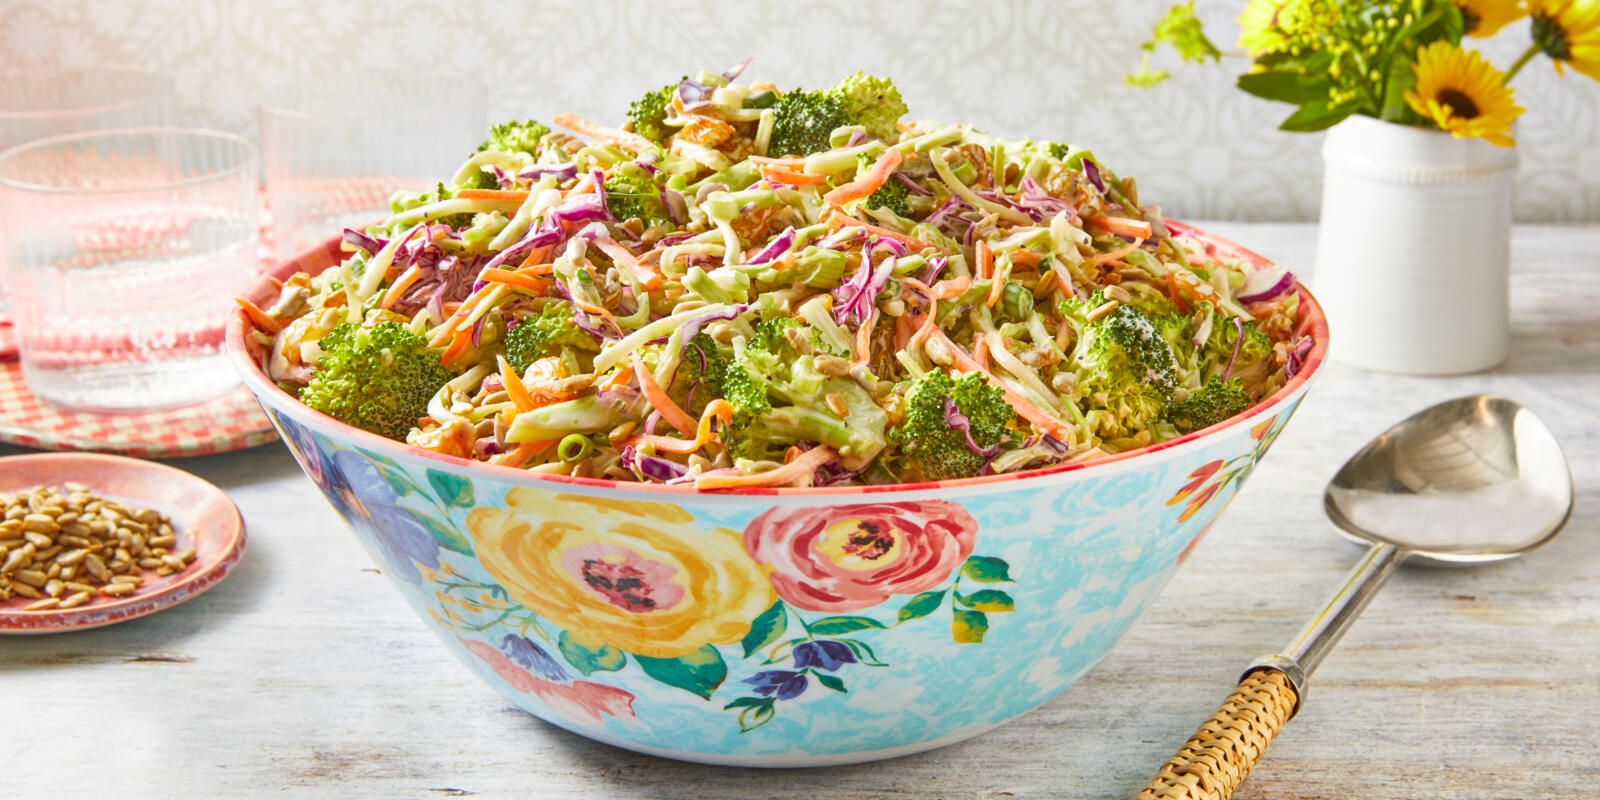 Save on Stop & Shop Rainbow Slaw Order Online Delivery | Stop & Shop